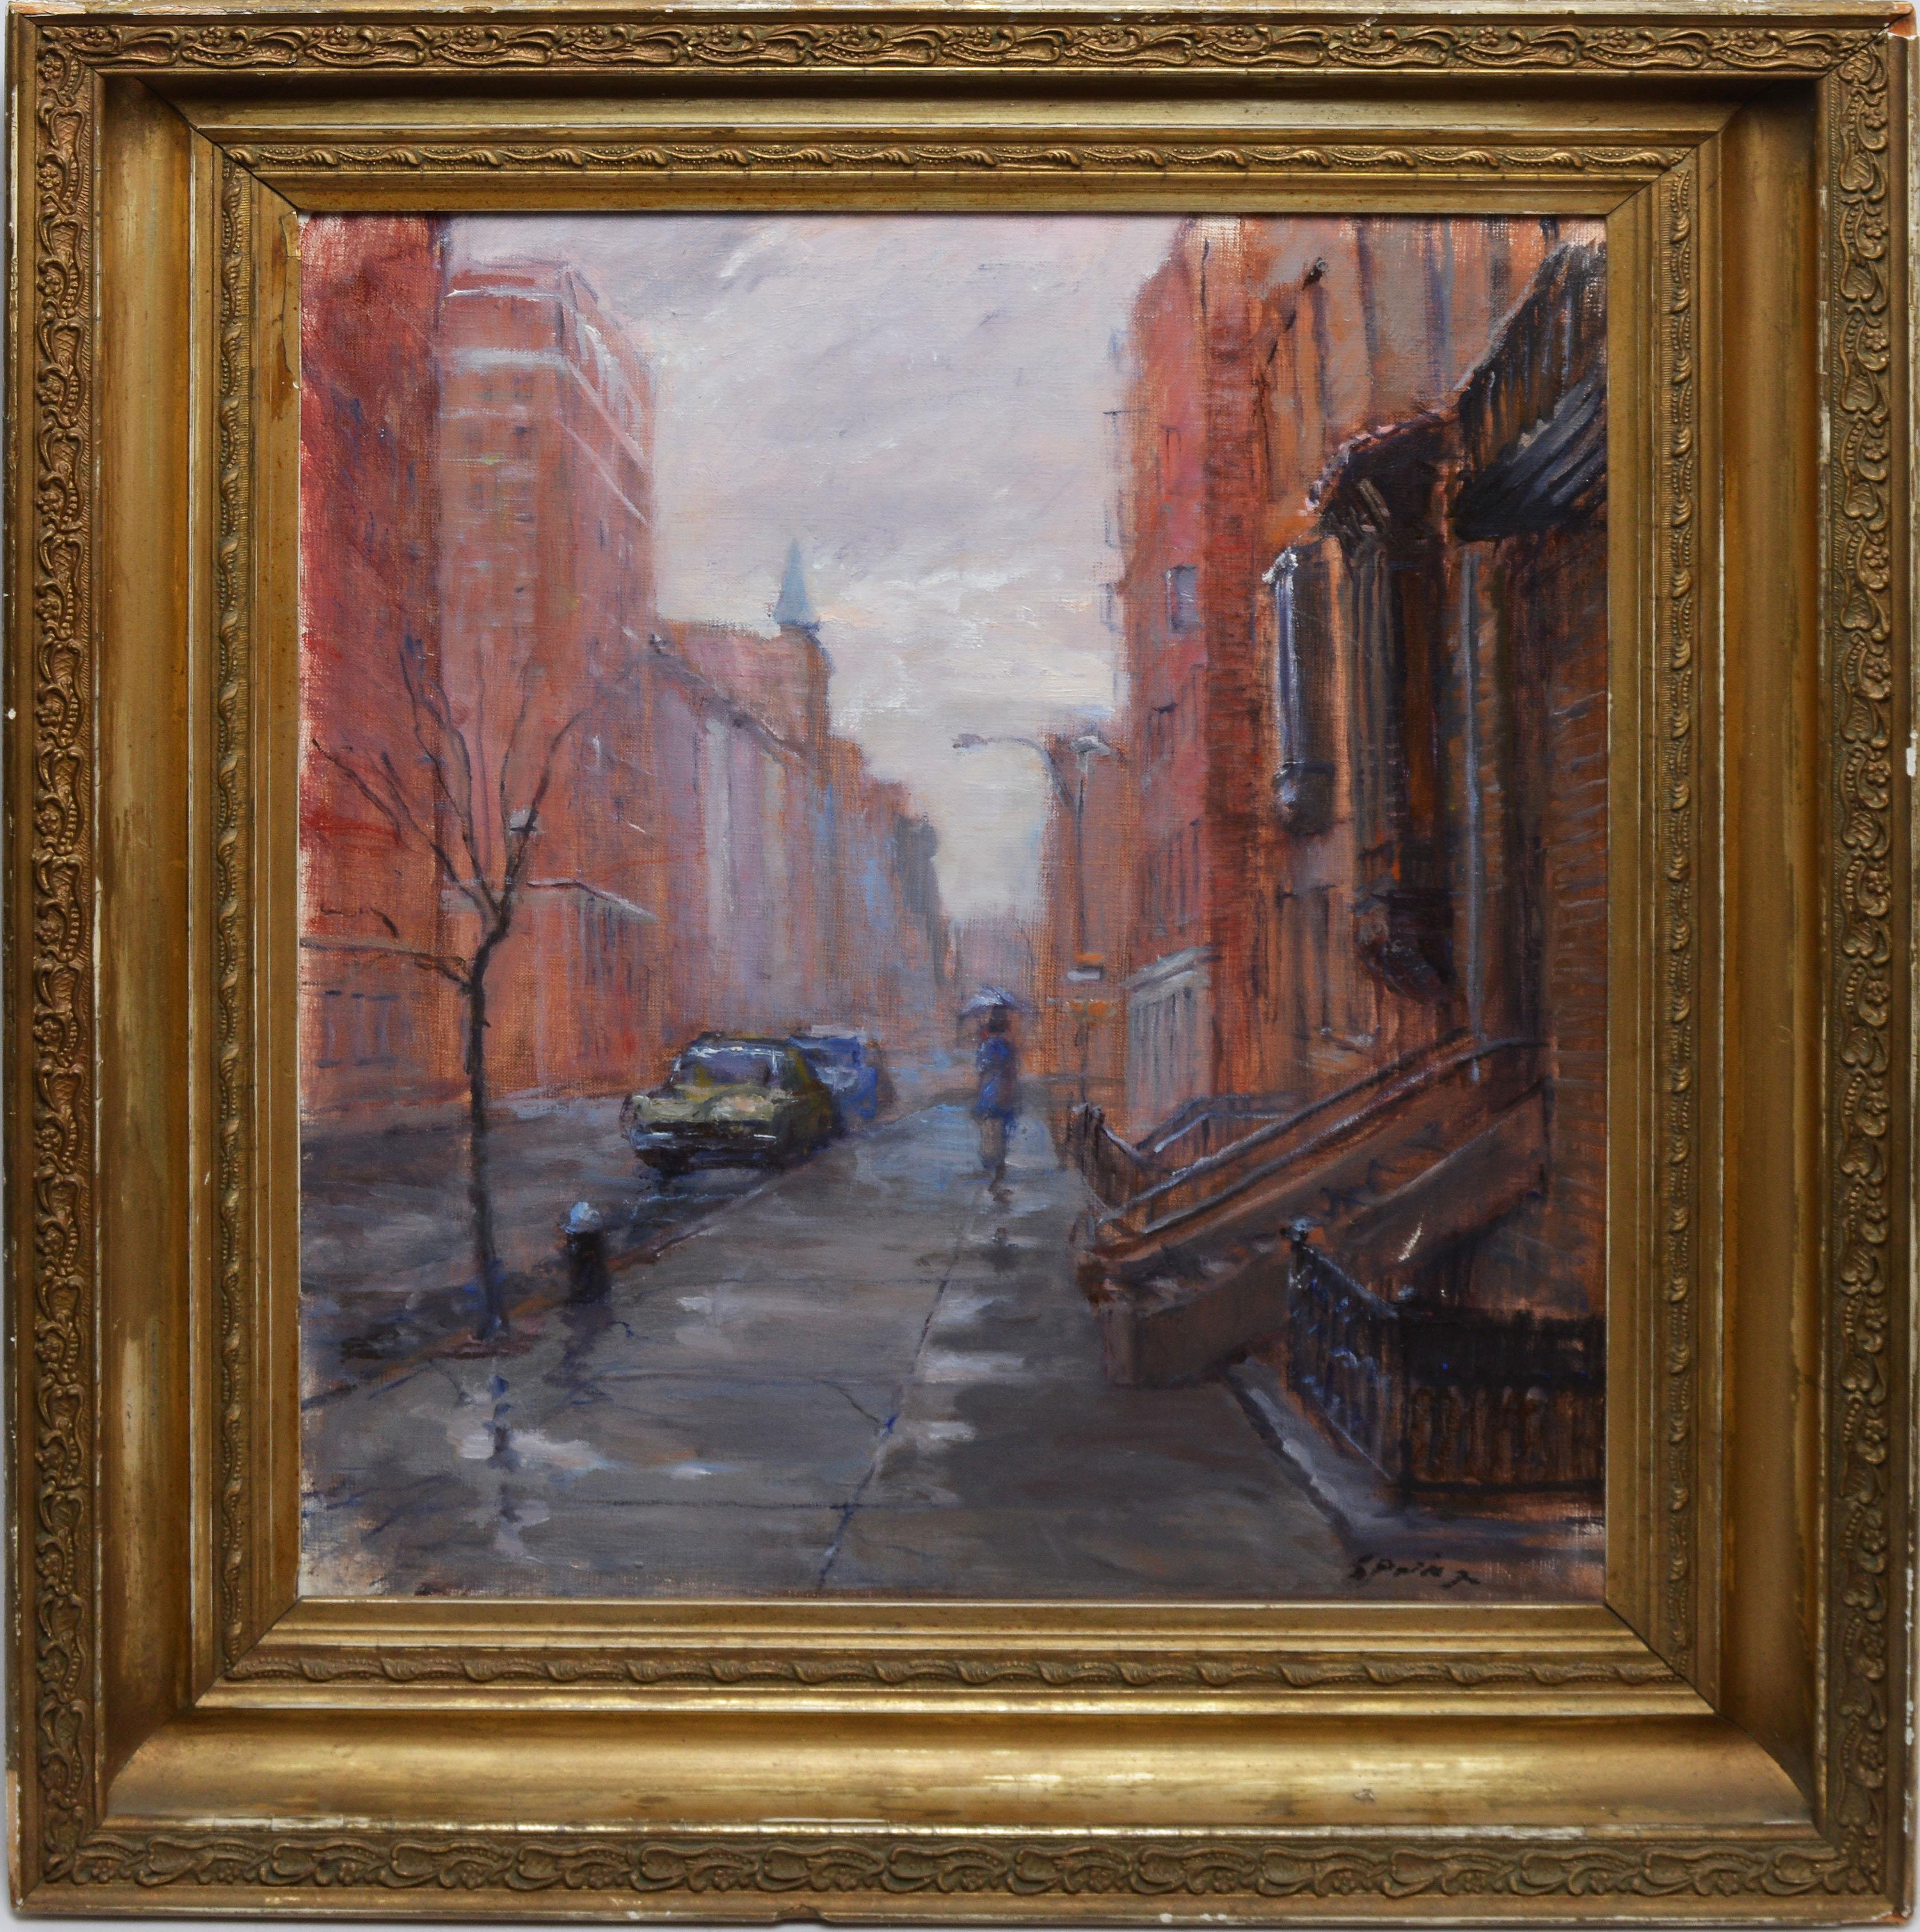 rainy day in new york painting